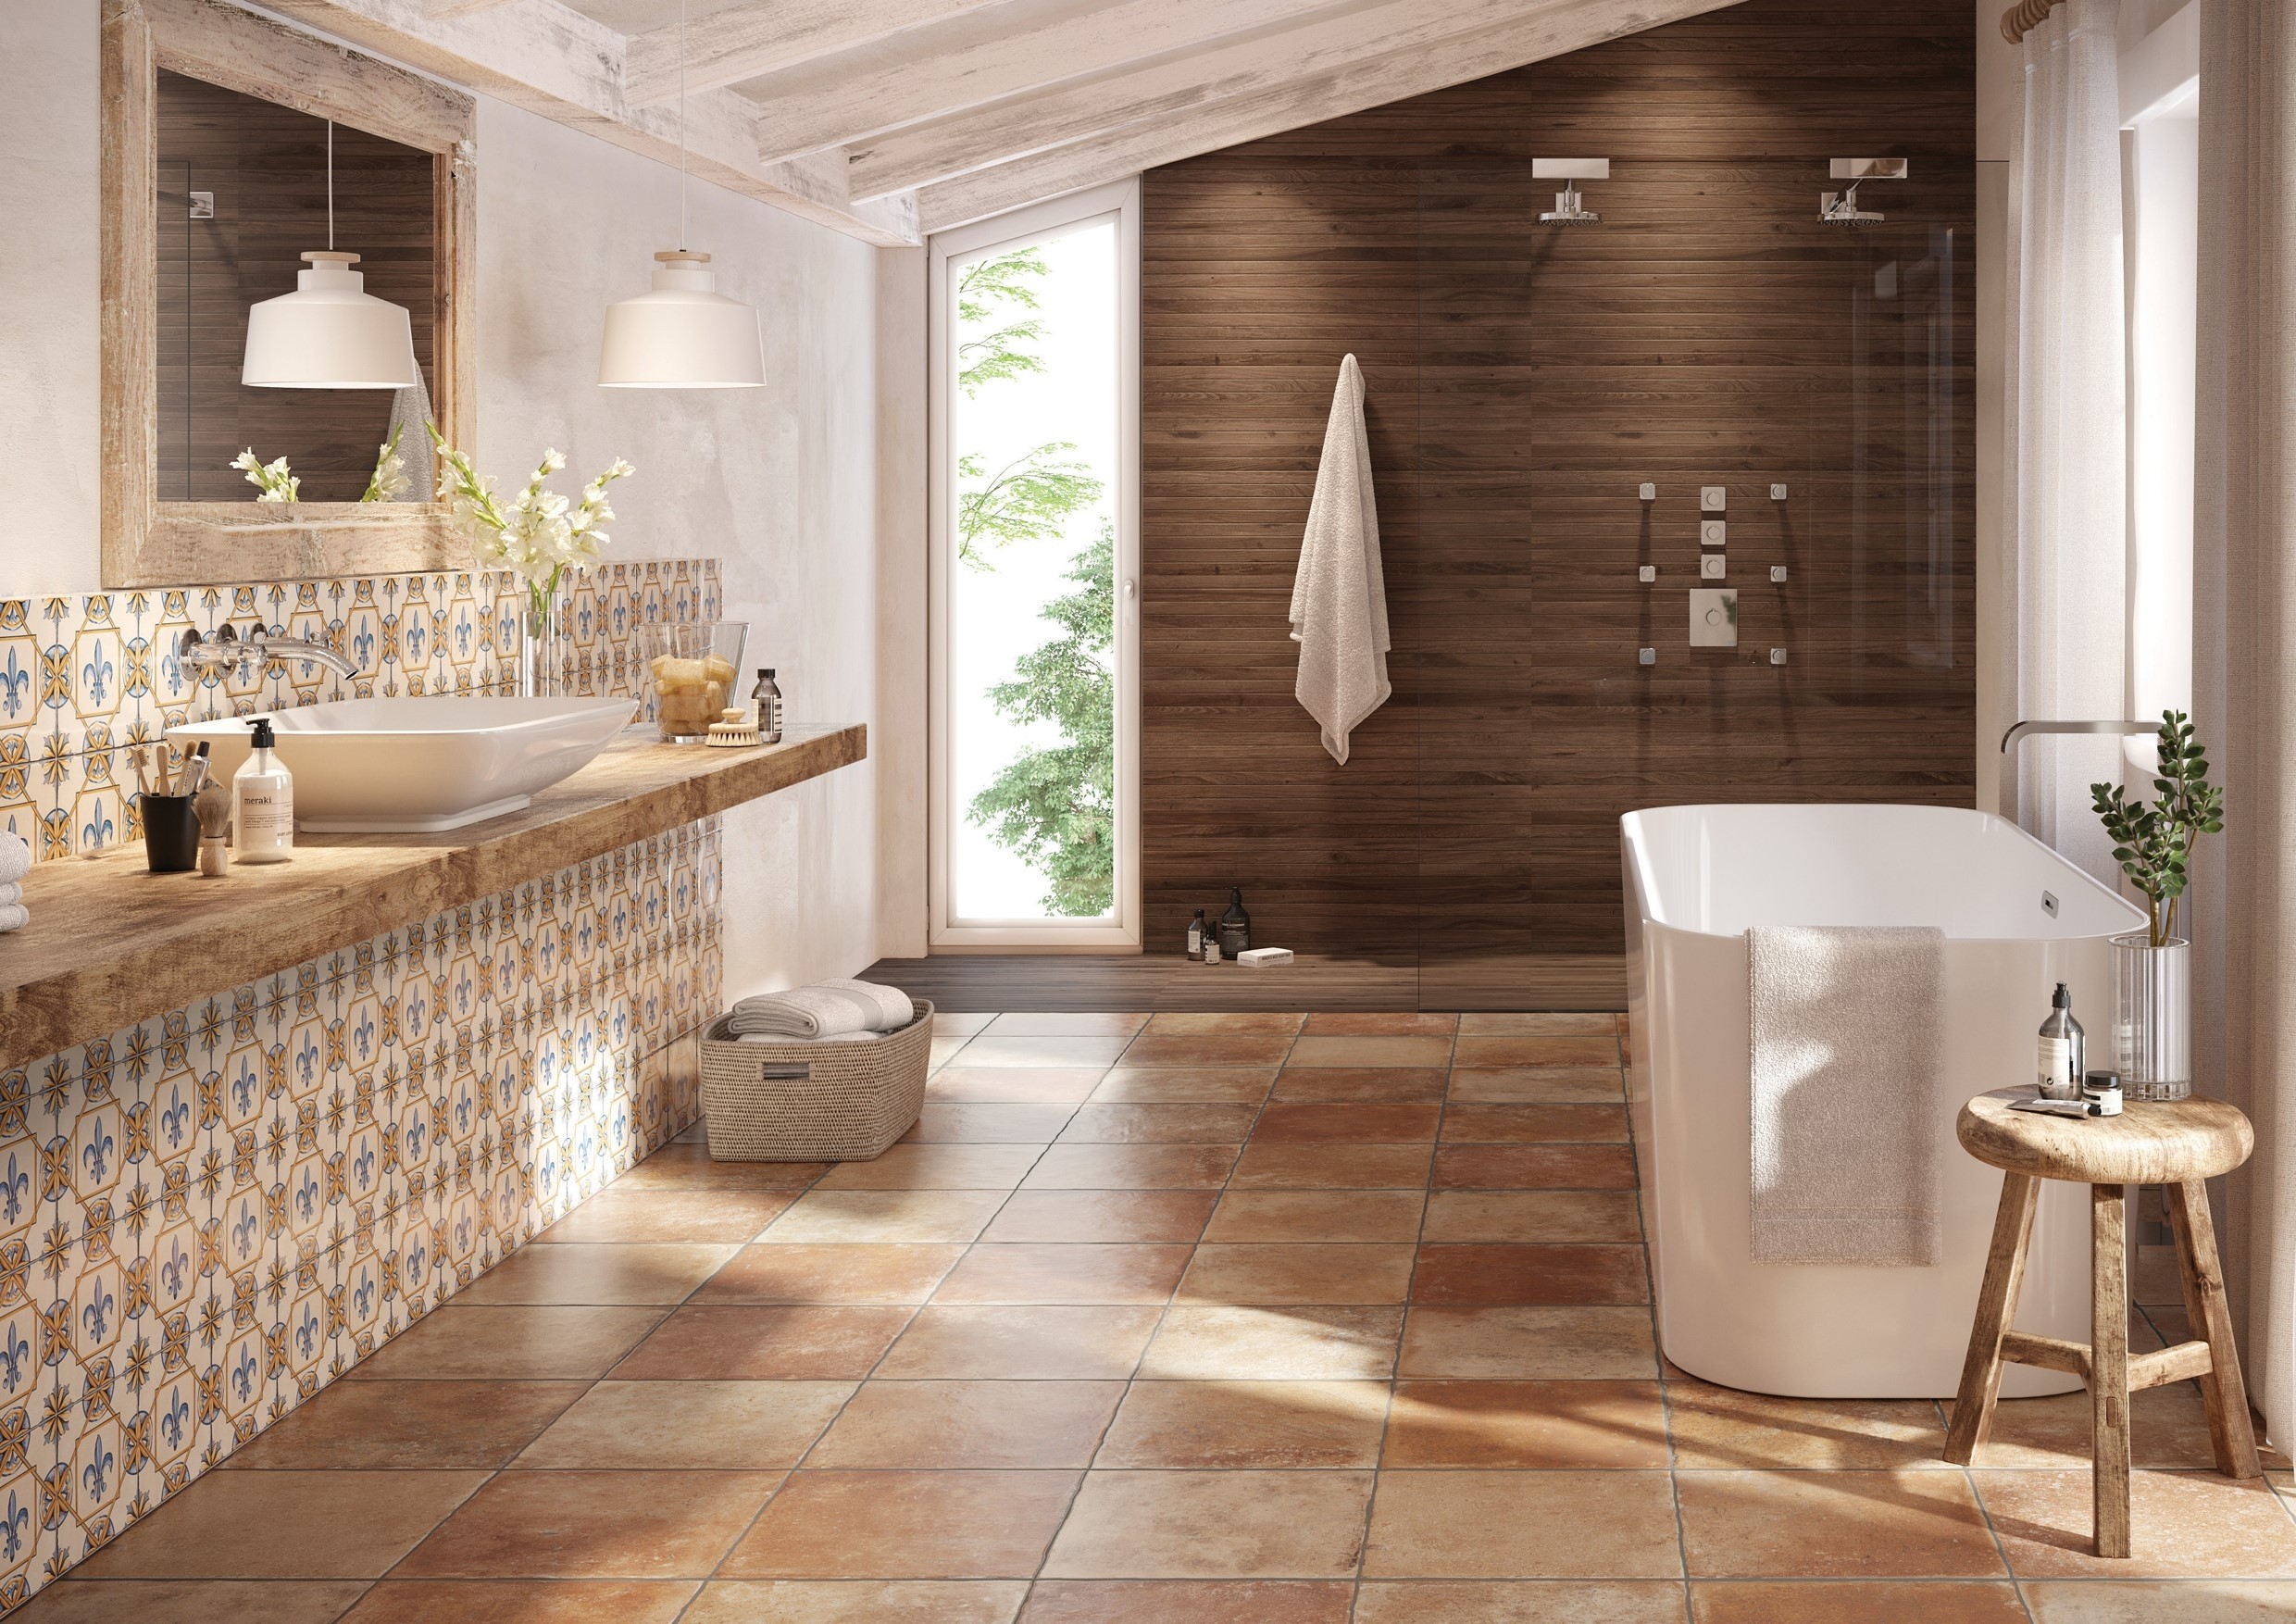 Elba stoneware floor and wall covering 40.6x40.6 Tuscany series by Ceramica Rondine
